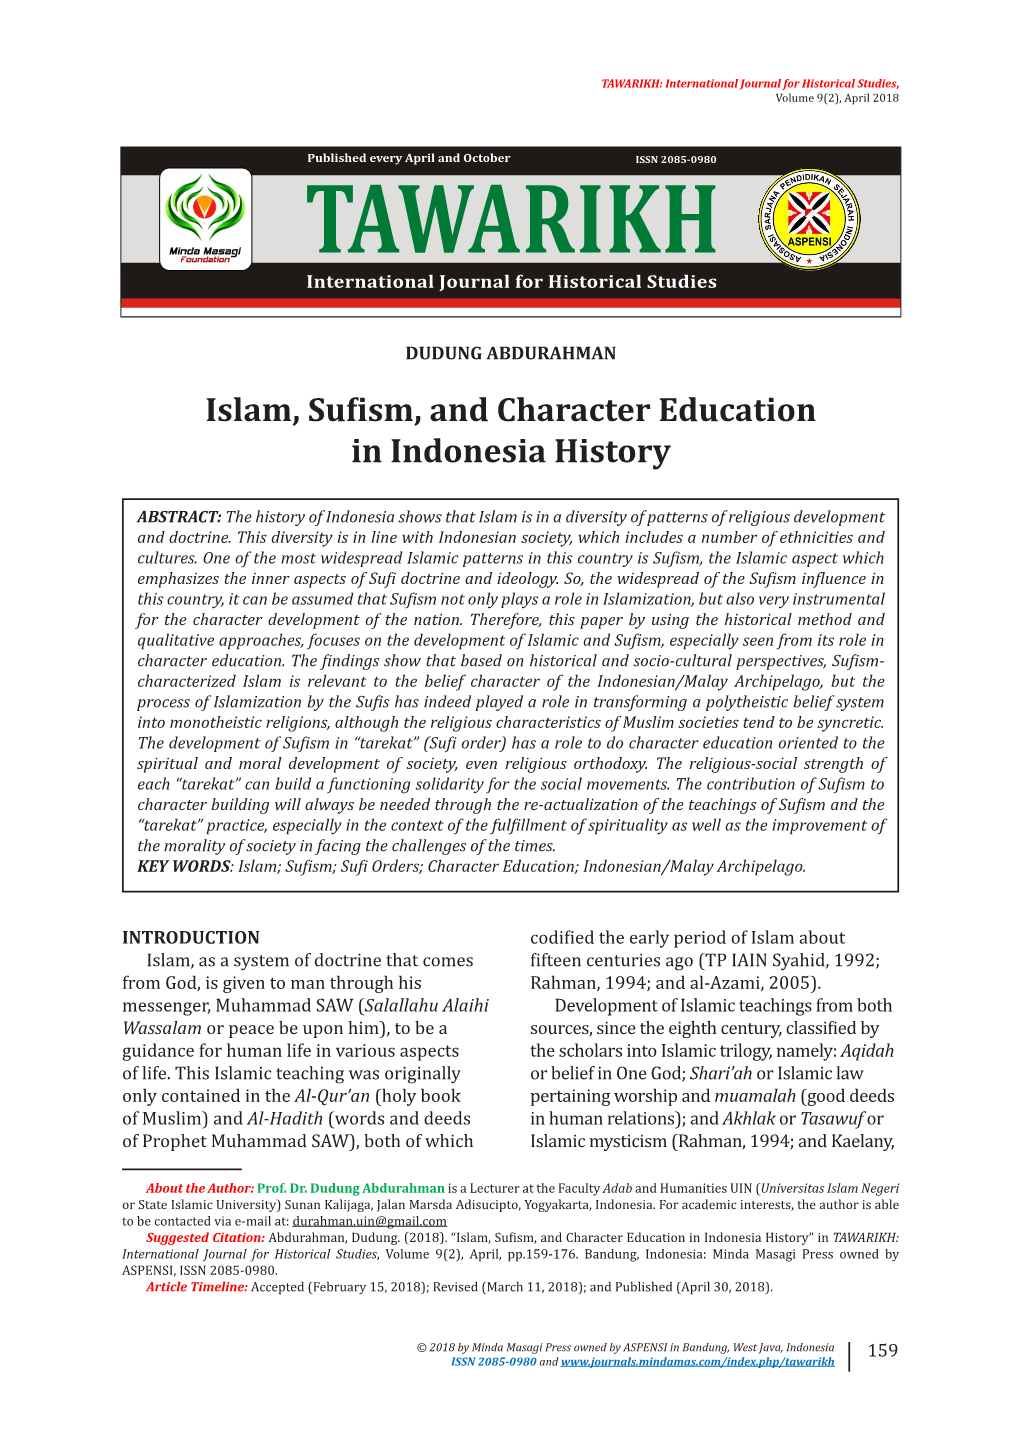 Islam, Sufism, and Character Education in Indonesia History